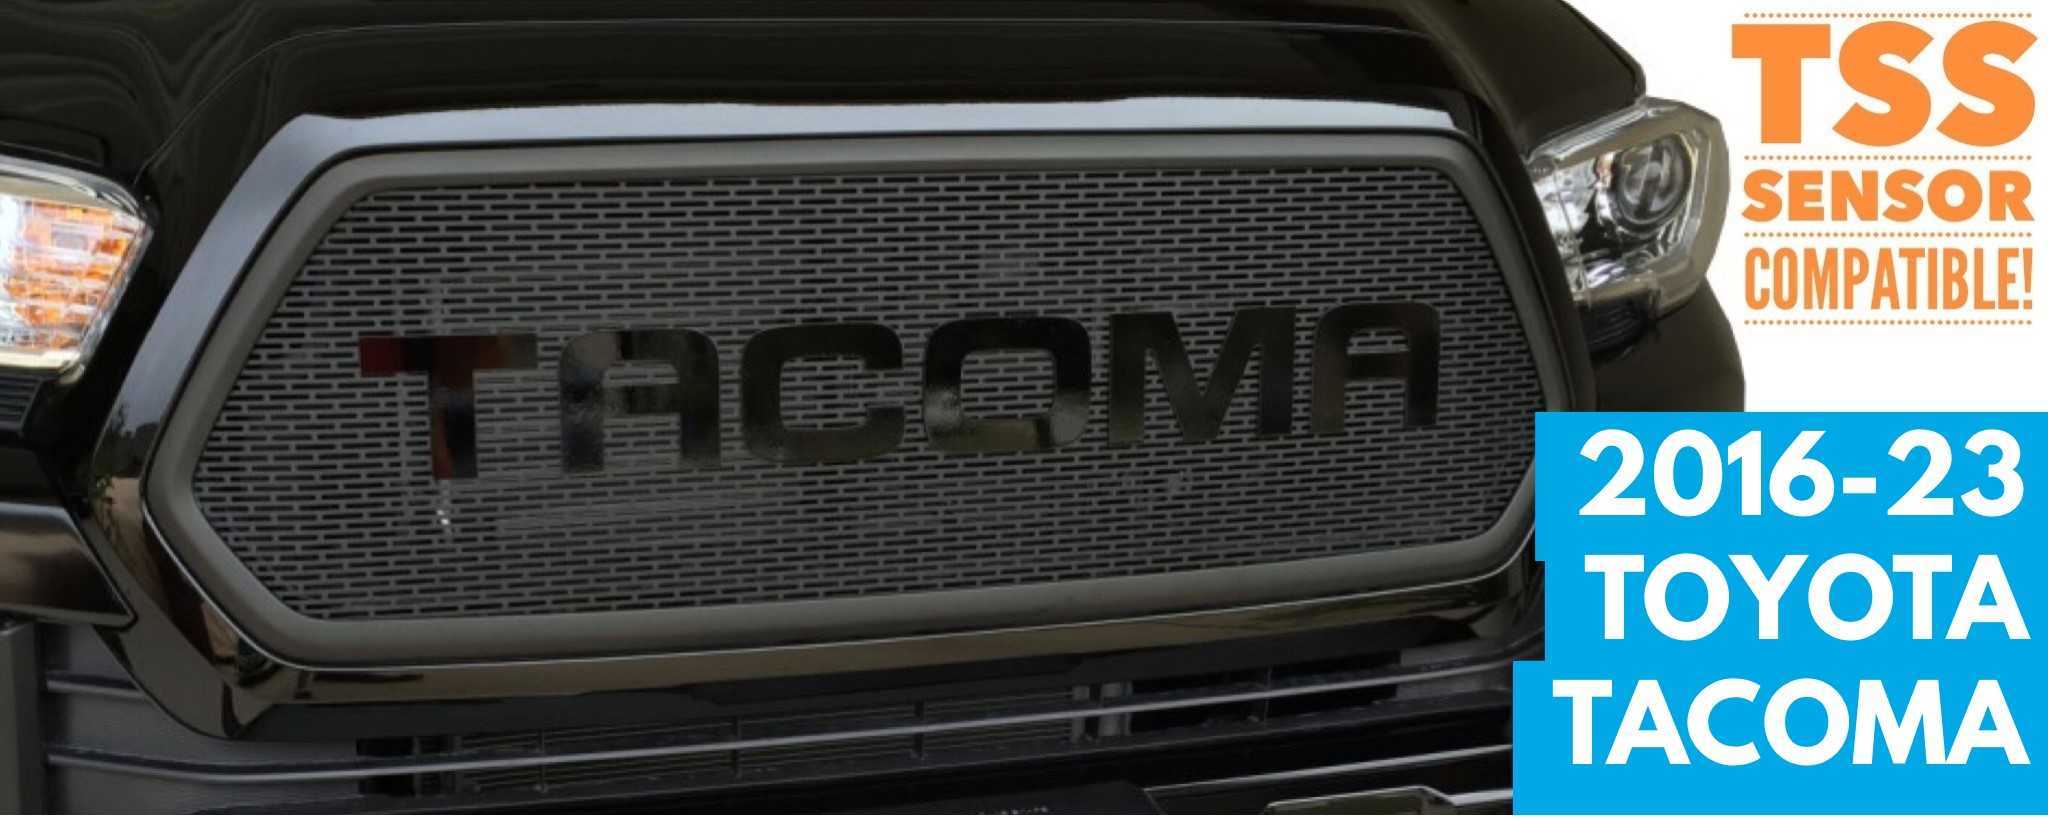  Custom Car and Truck Grills - Mesh Grill Sheets and  More!